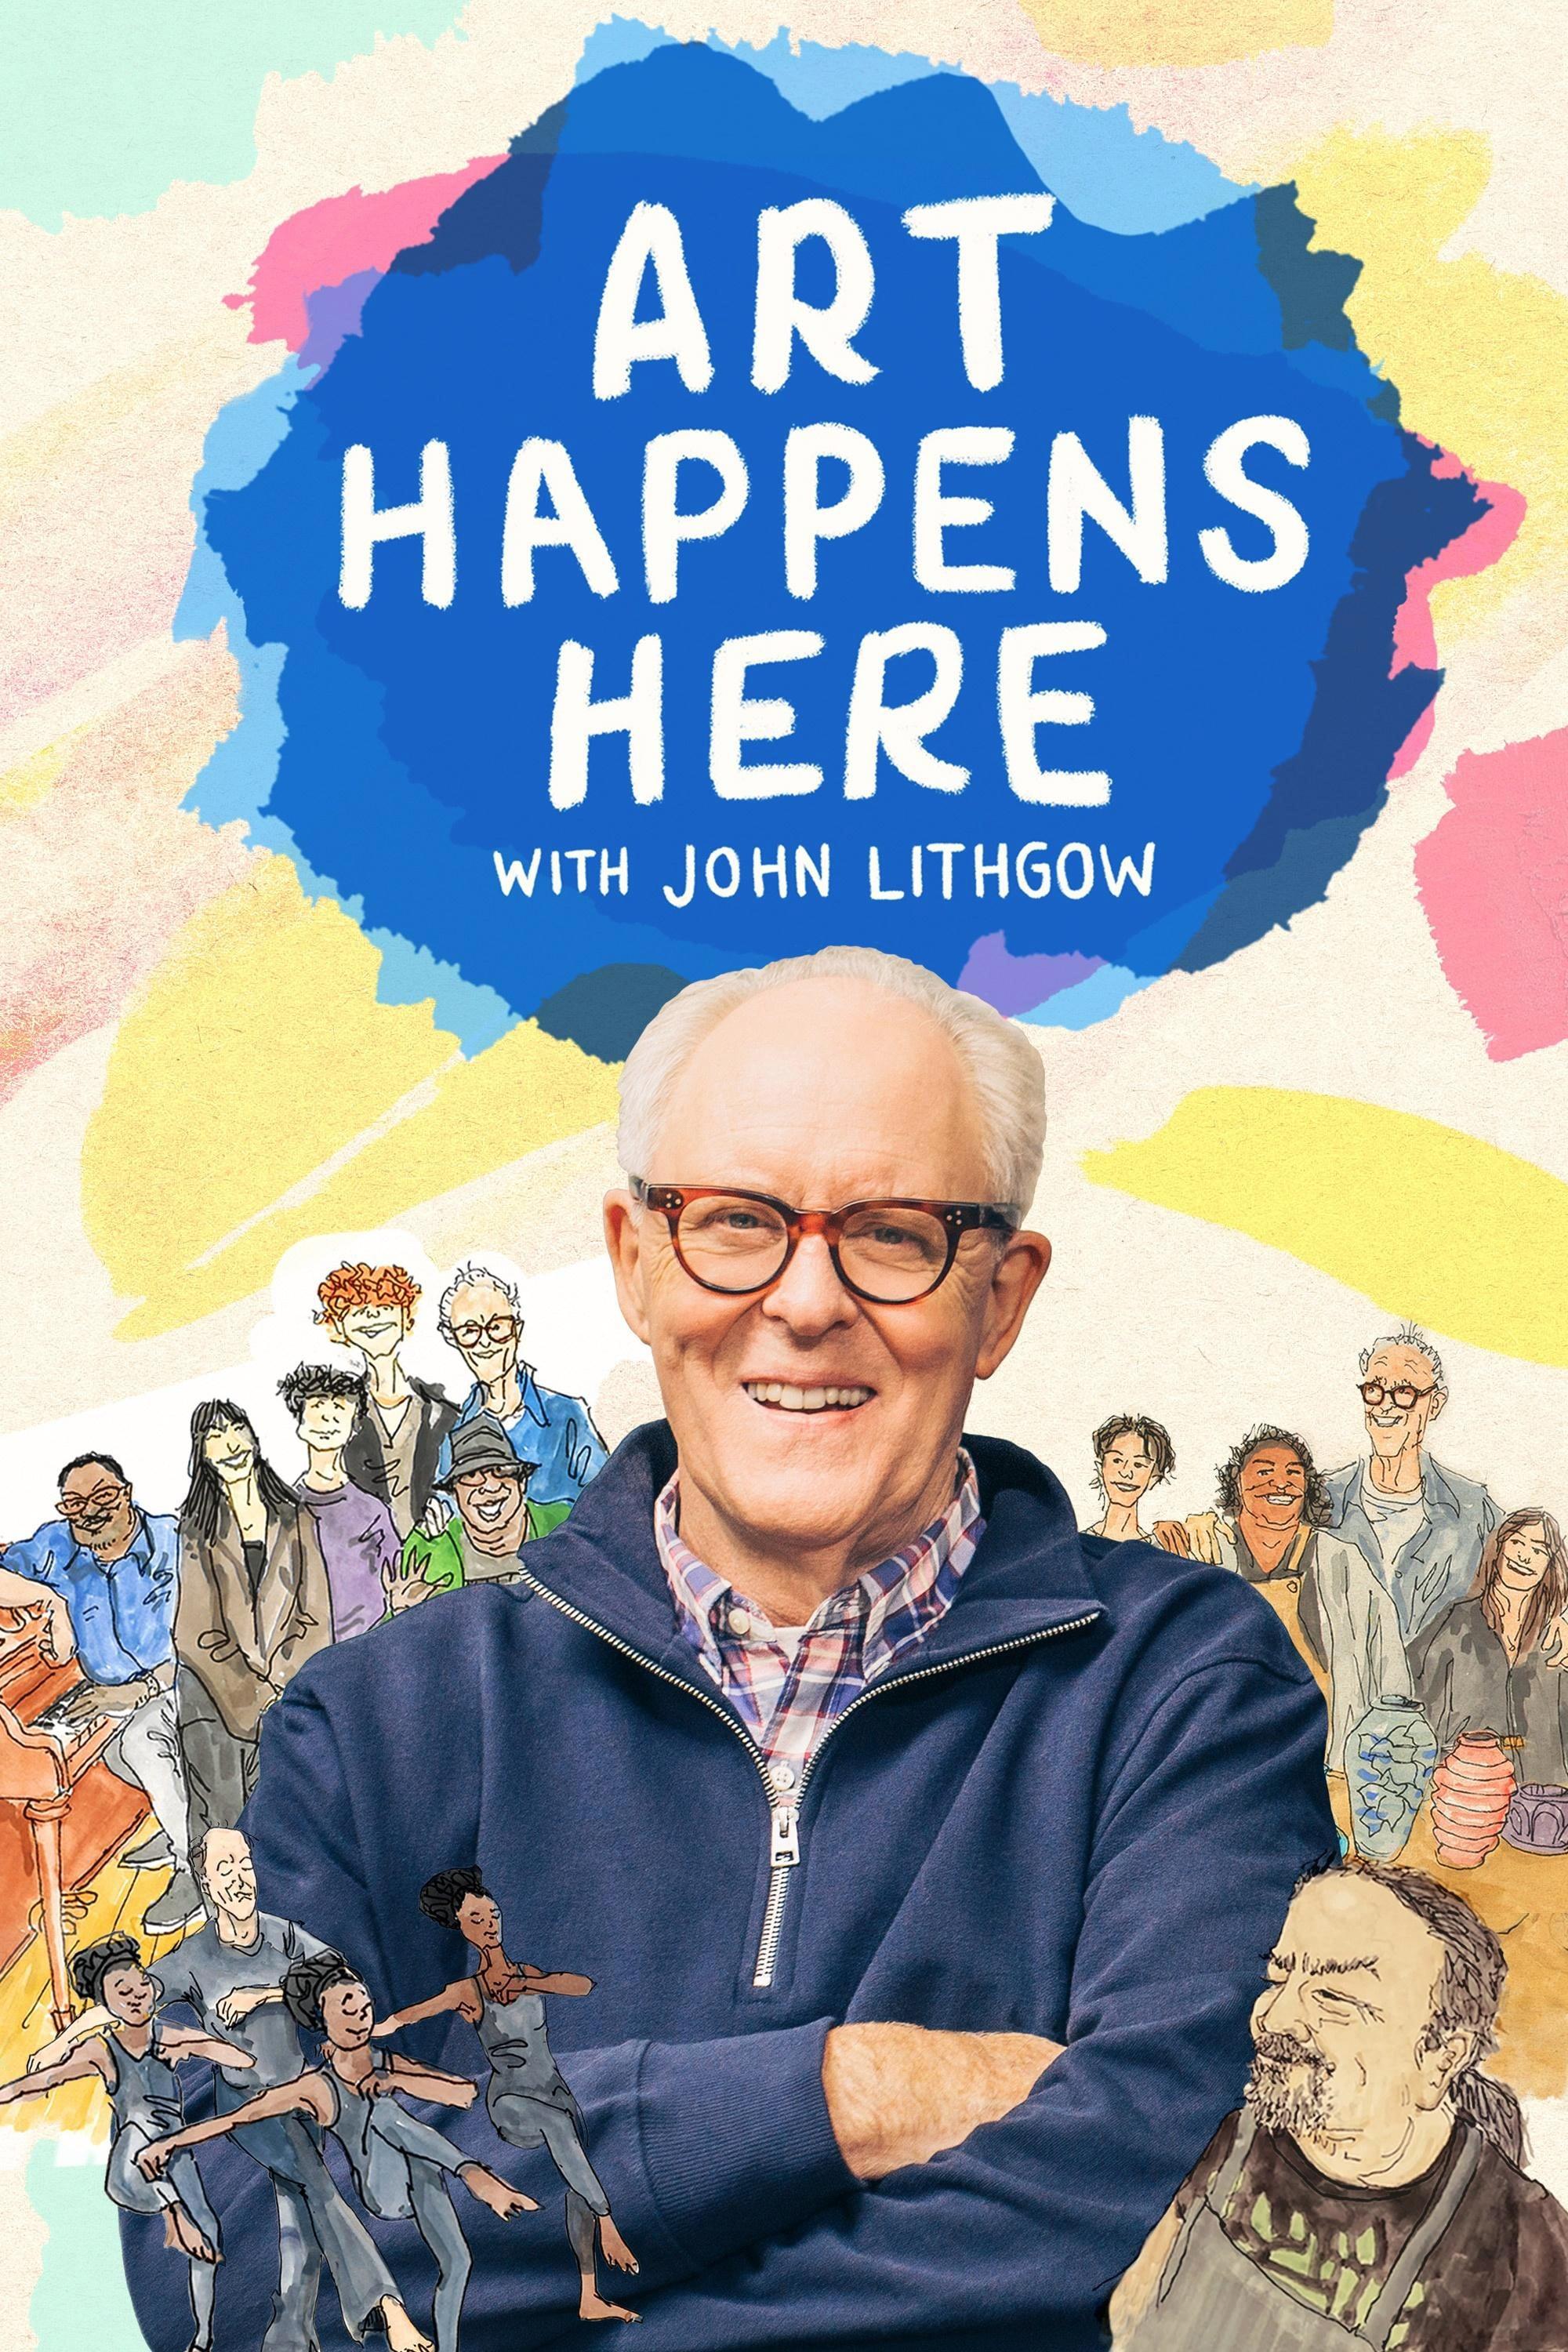 Art Happens Here with John Lithgow poster